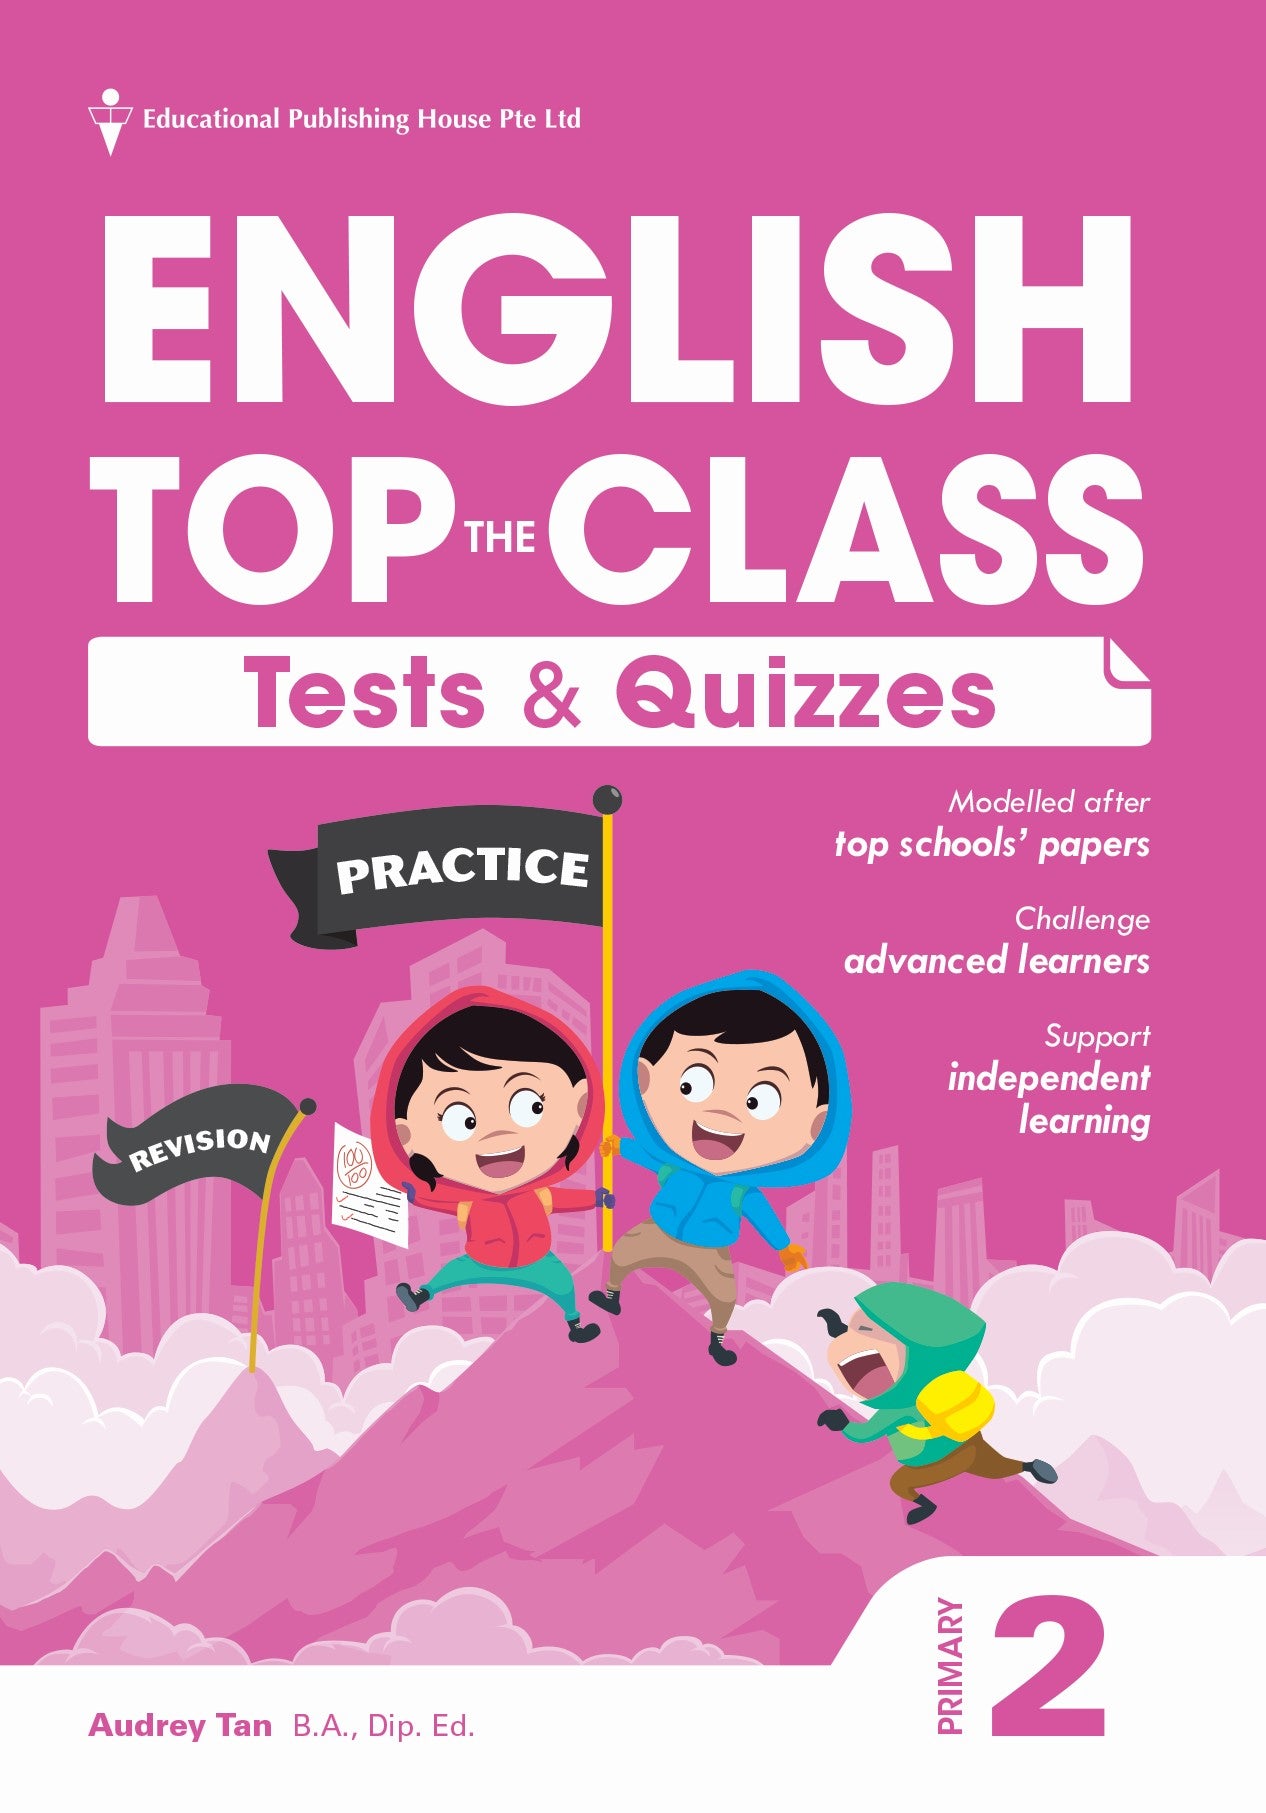 Primary 2 English Top The Class: Tests and Quizzes - _MS, AUDREY TAN, CHALLENGING, EDUCATIONAL PUBLISHING HOUSE, ENGLISH, PRIMARY 2